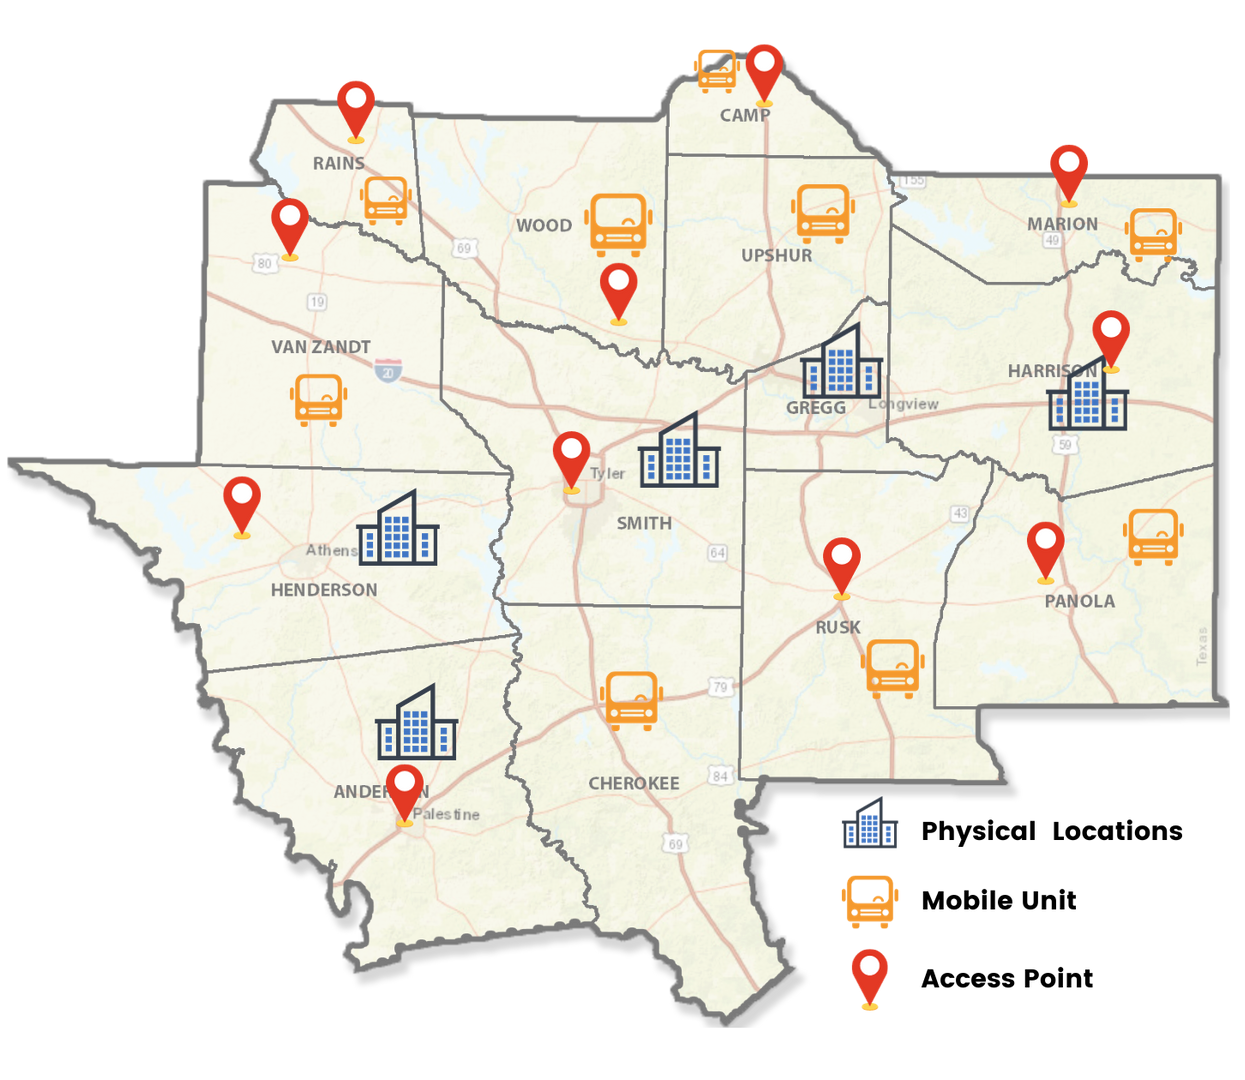 A map of texas showing physical locations and mobile units